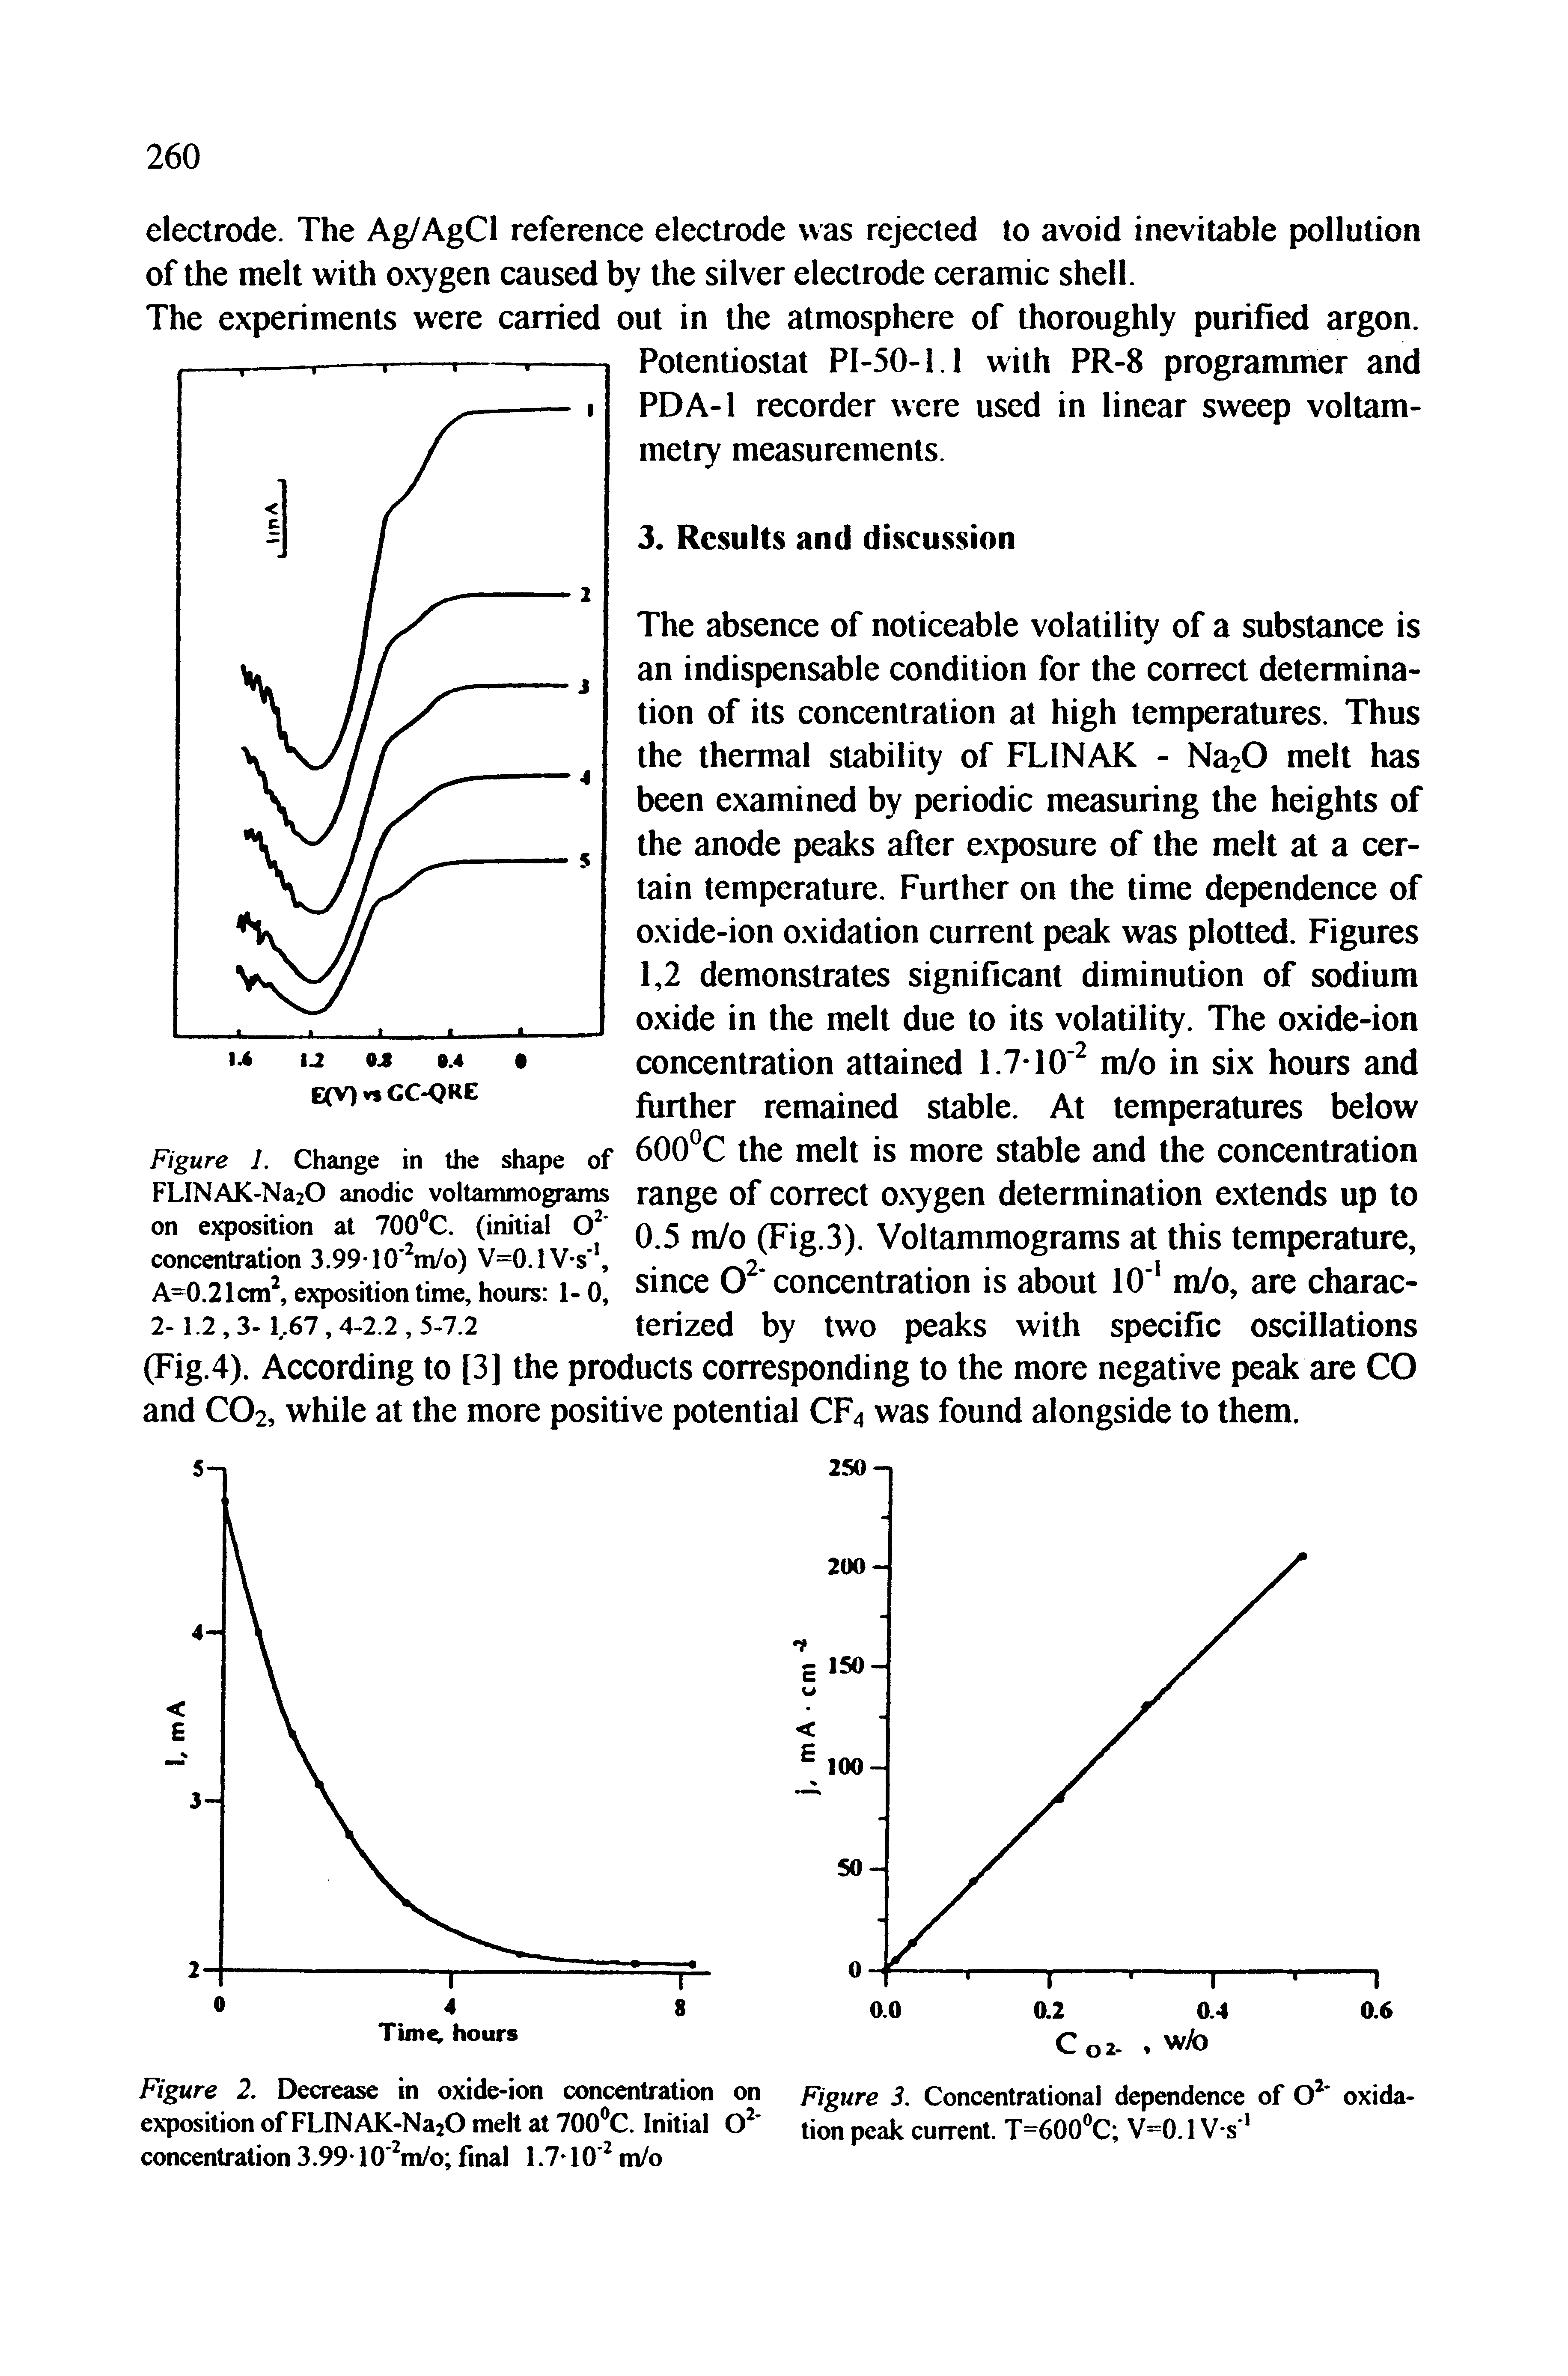 Figure 1. Change in the shape of FLINAK-Na20 anodic voltammograms on exposition at 700°C. (initial O concentration 3.9910 Wo) V=0.1V s A=0.21cm exposition time, hours 1- 0,...